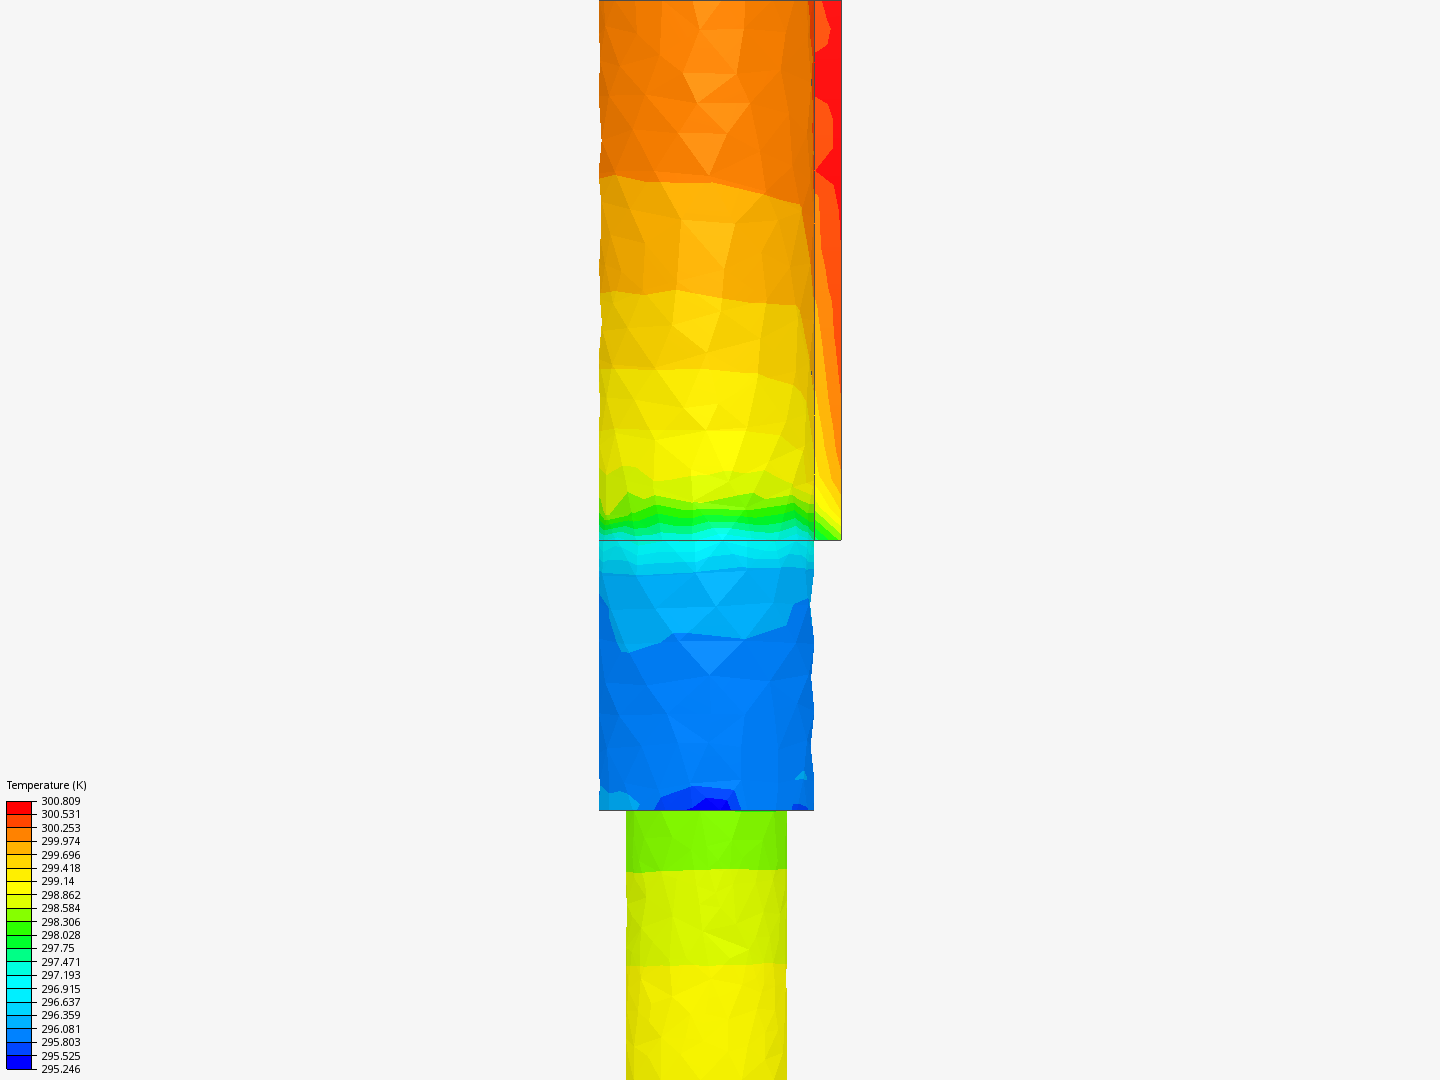 PipeTherm image